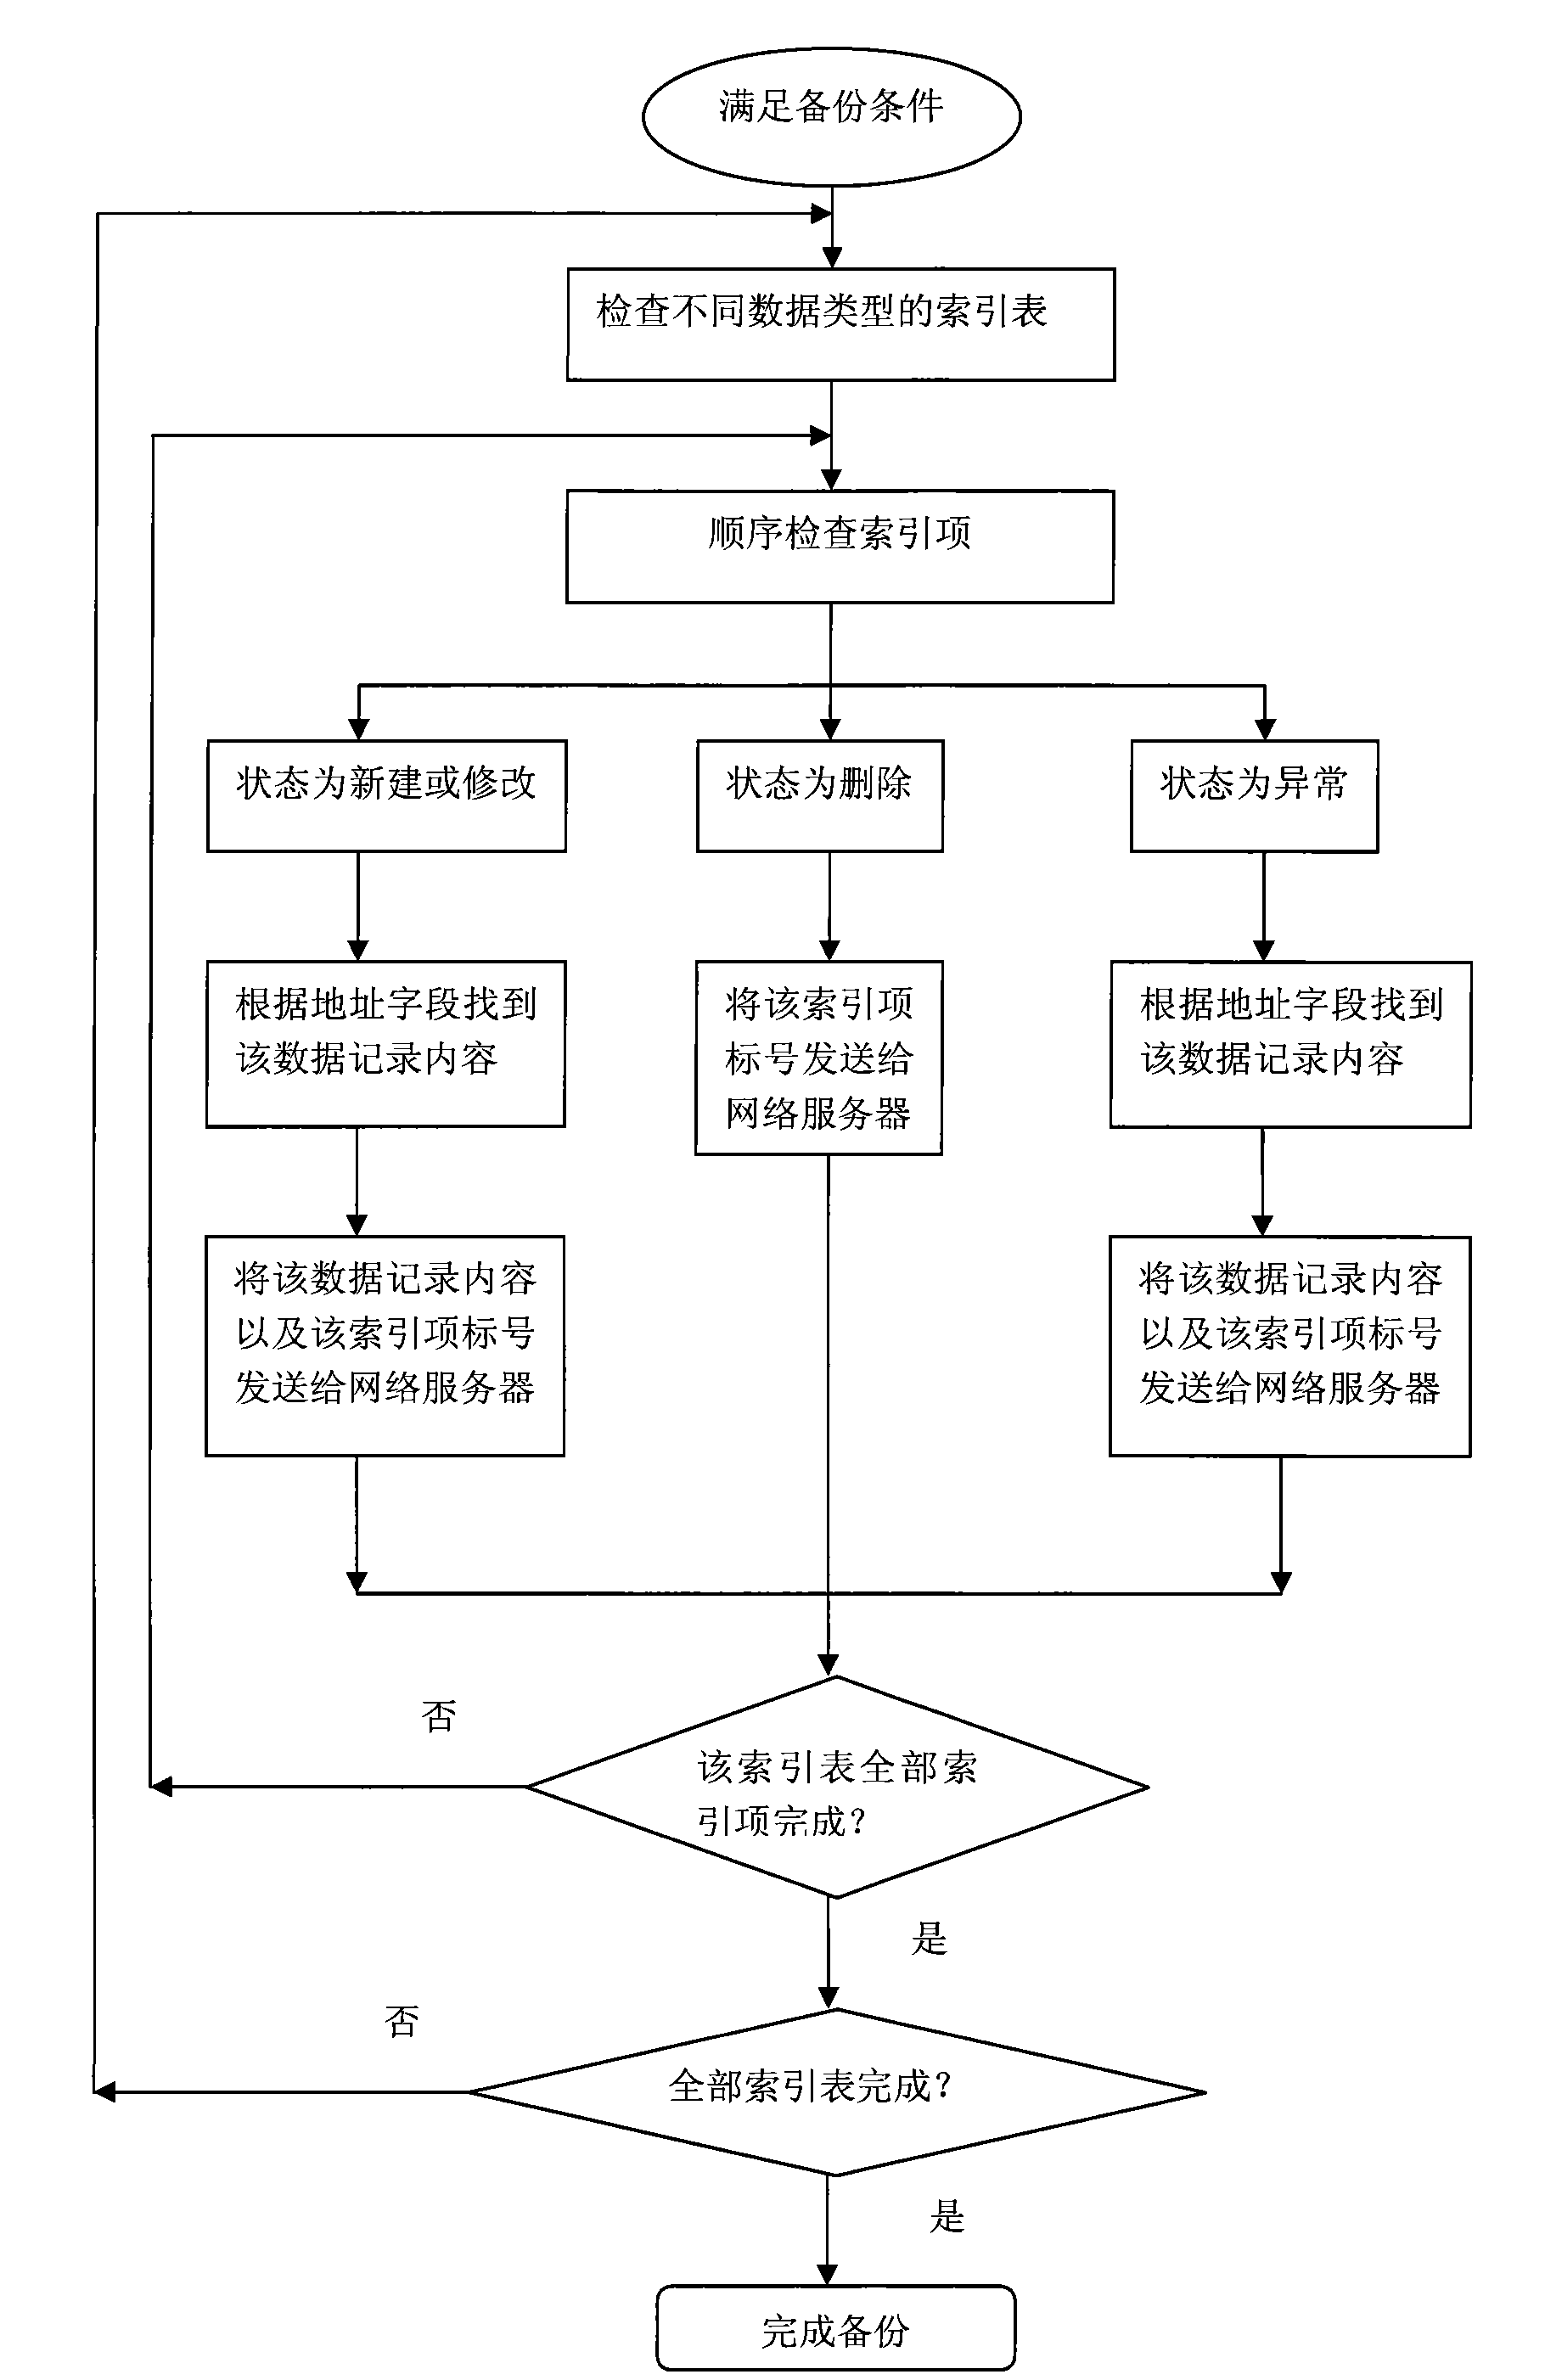 Method and system for backing up terminal data